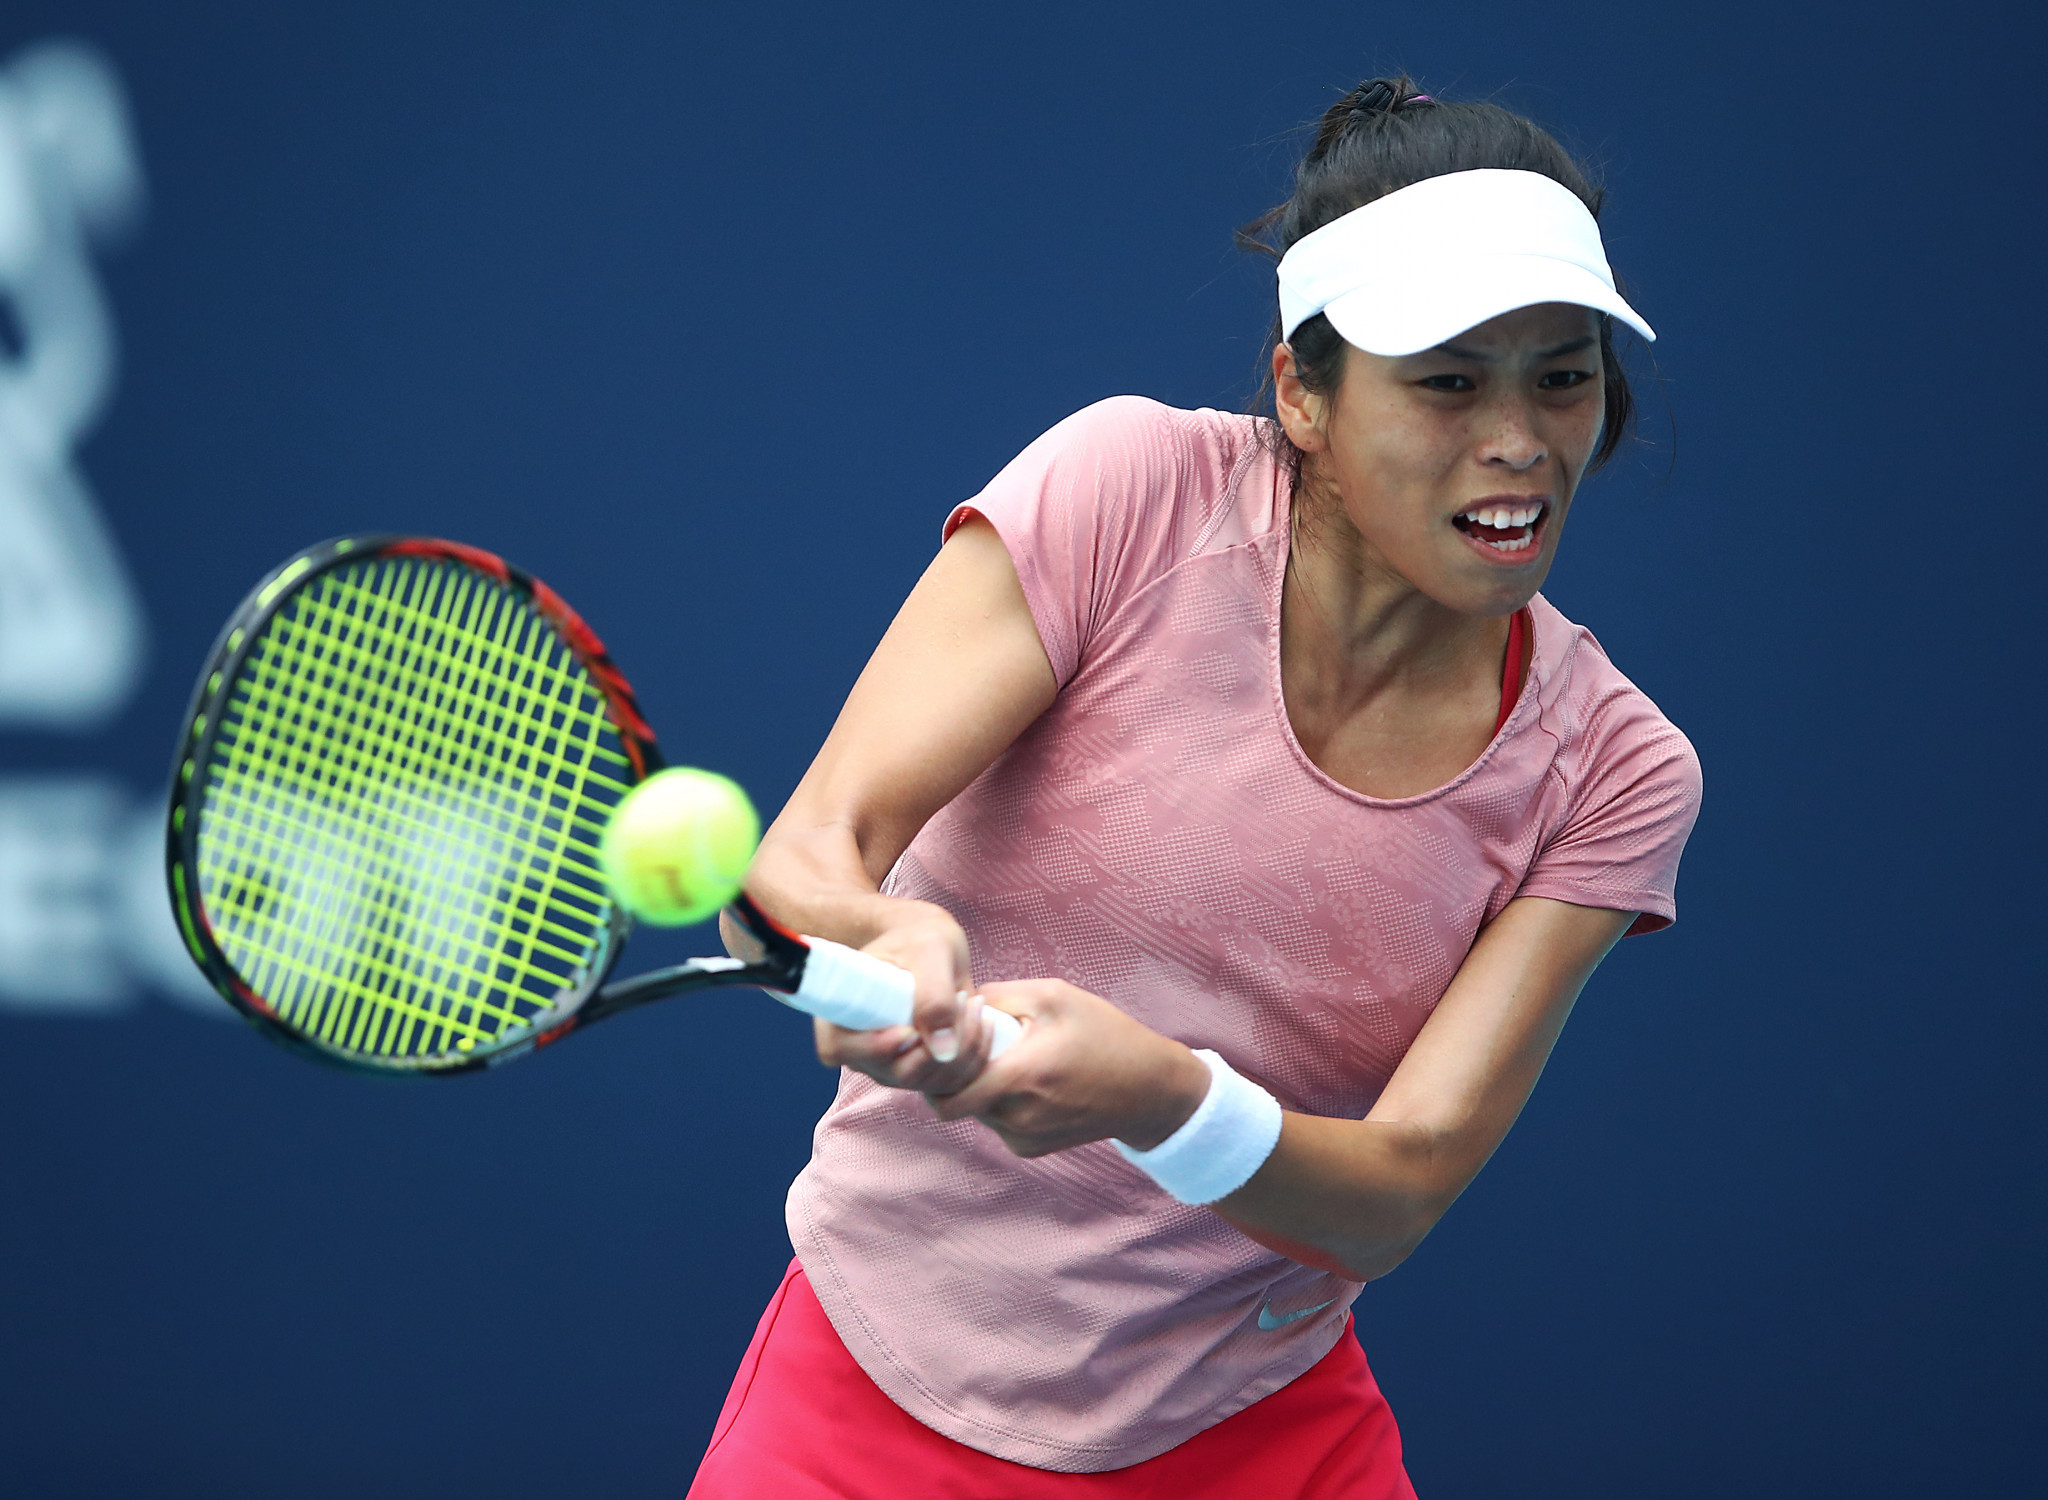 Hsieh wins at Stuttgart Open to set up second-round meeting with top seed Osaka